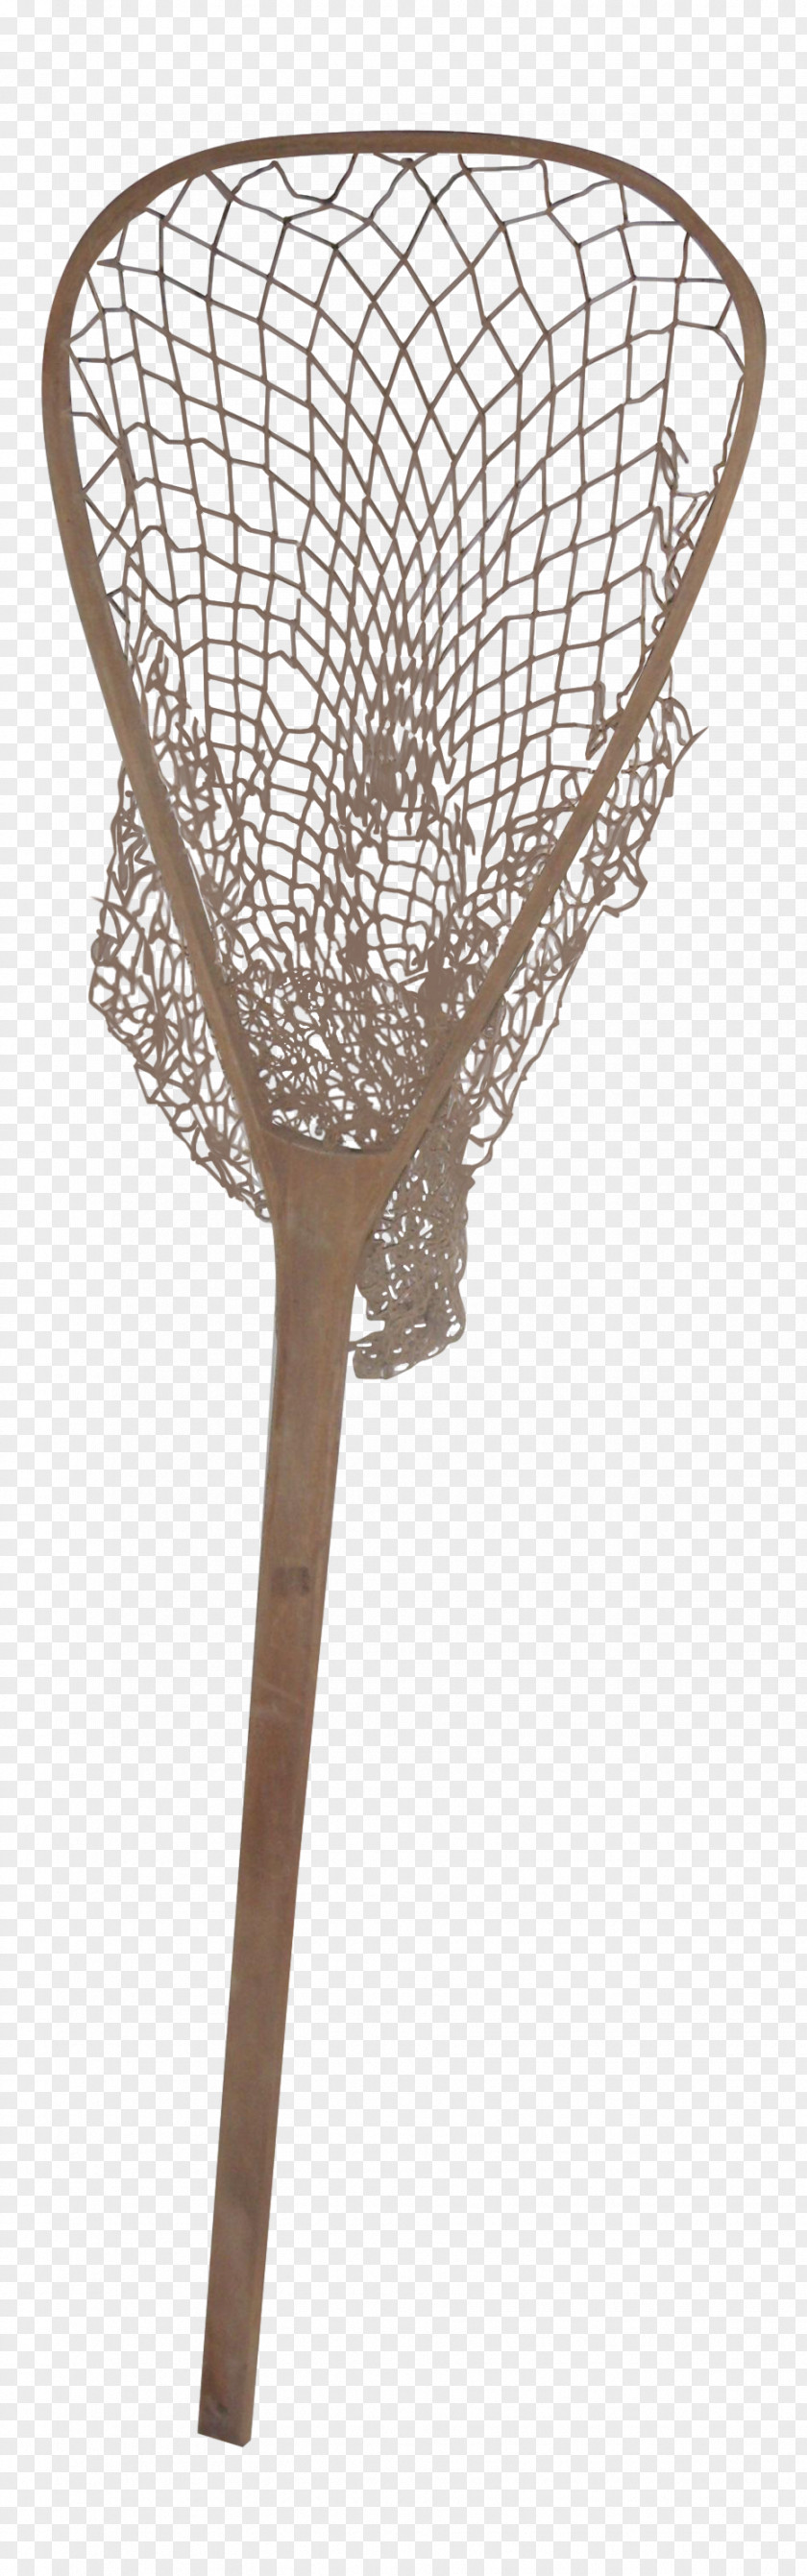 Vintage Fishing Net Nets Product Wood PNG